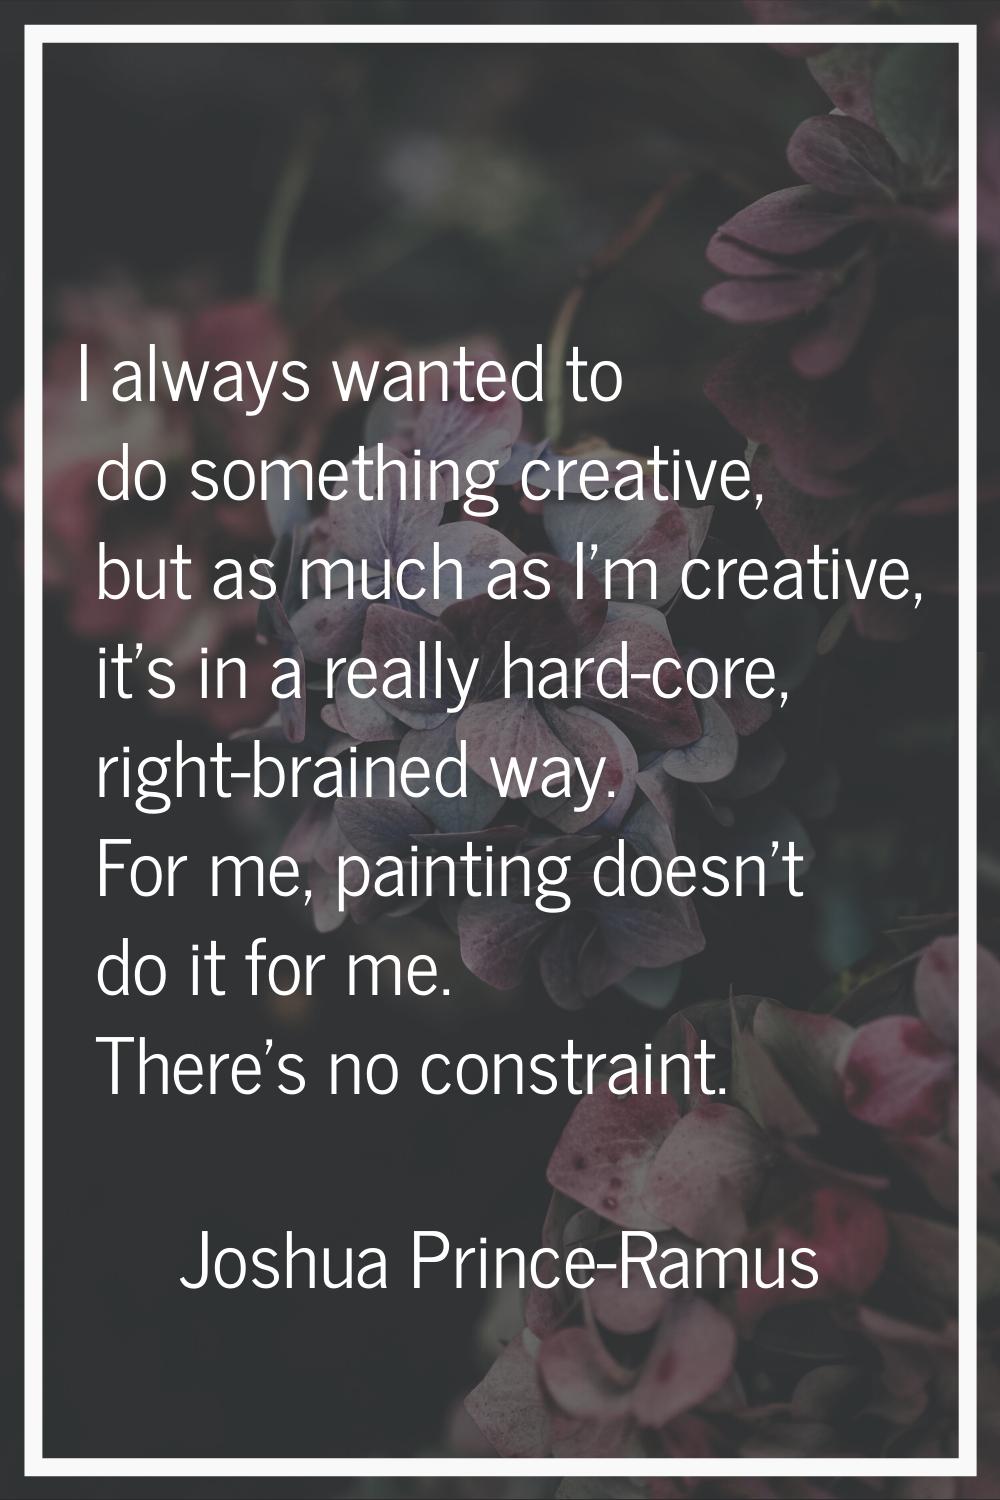 I always wanted to do something creative, but as much as I'm creative, it's in a really hard-core, 